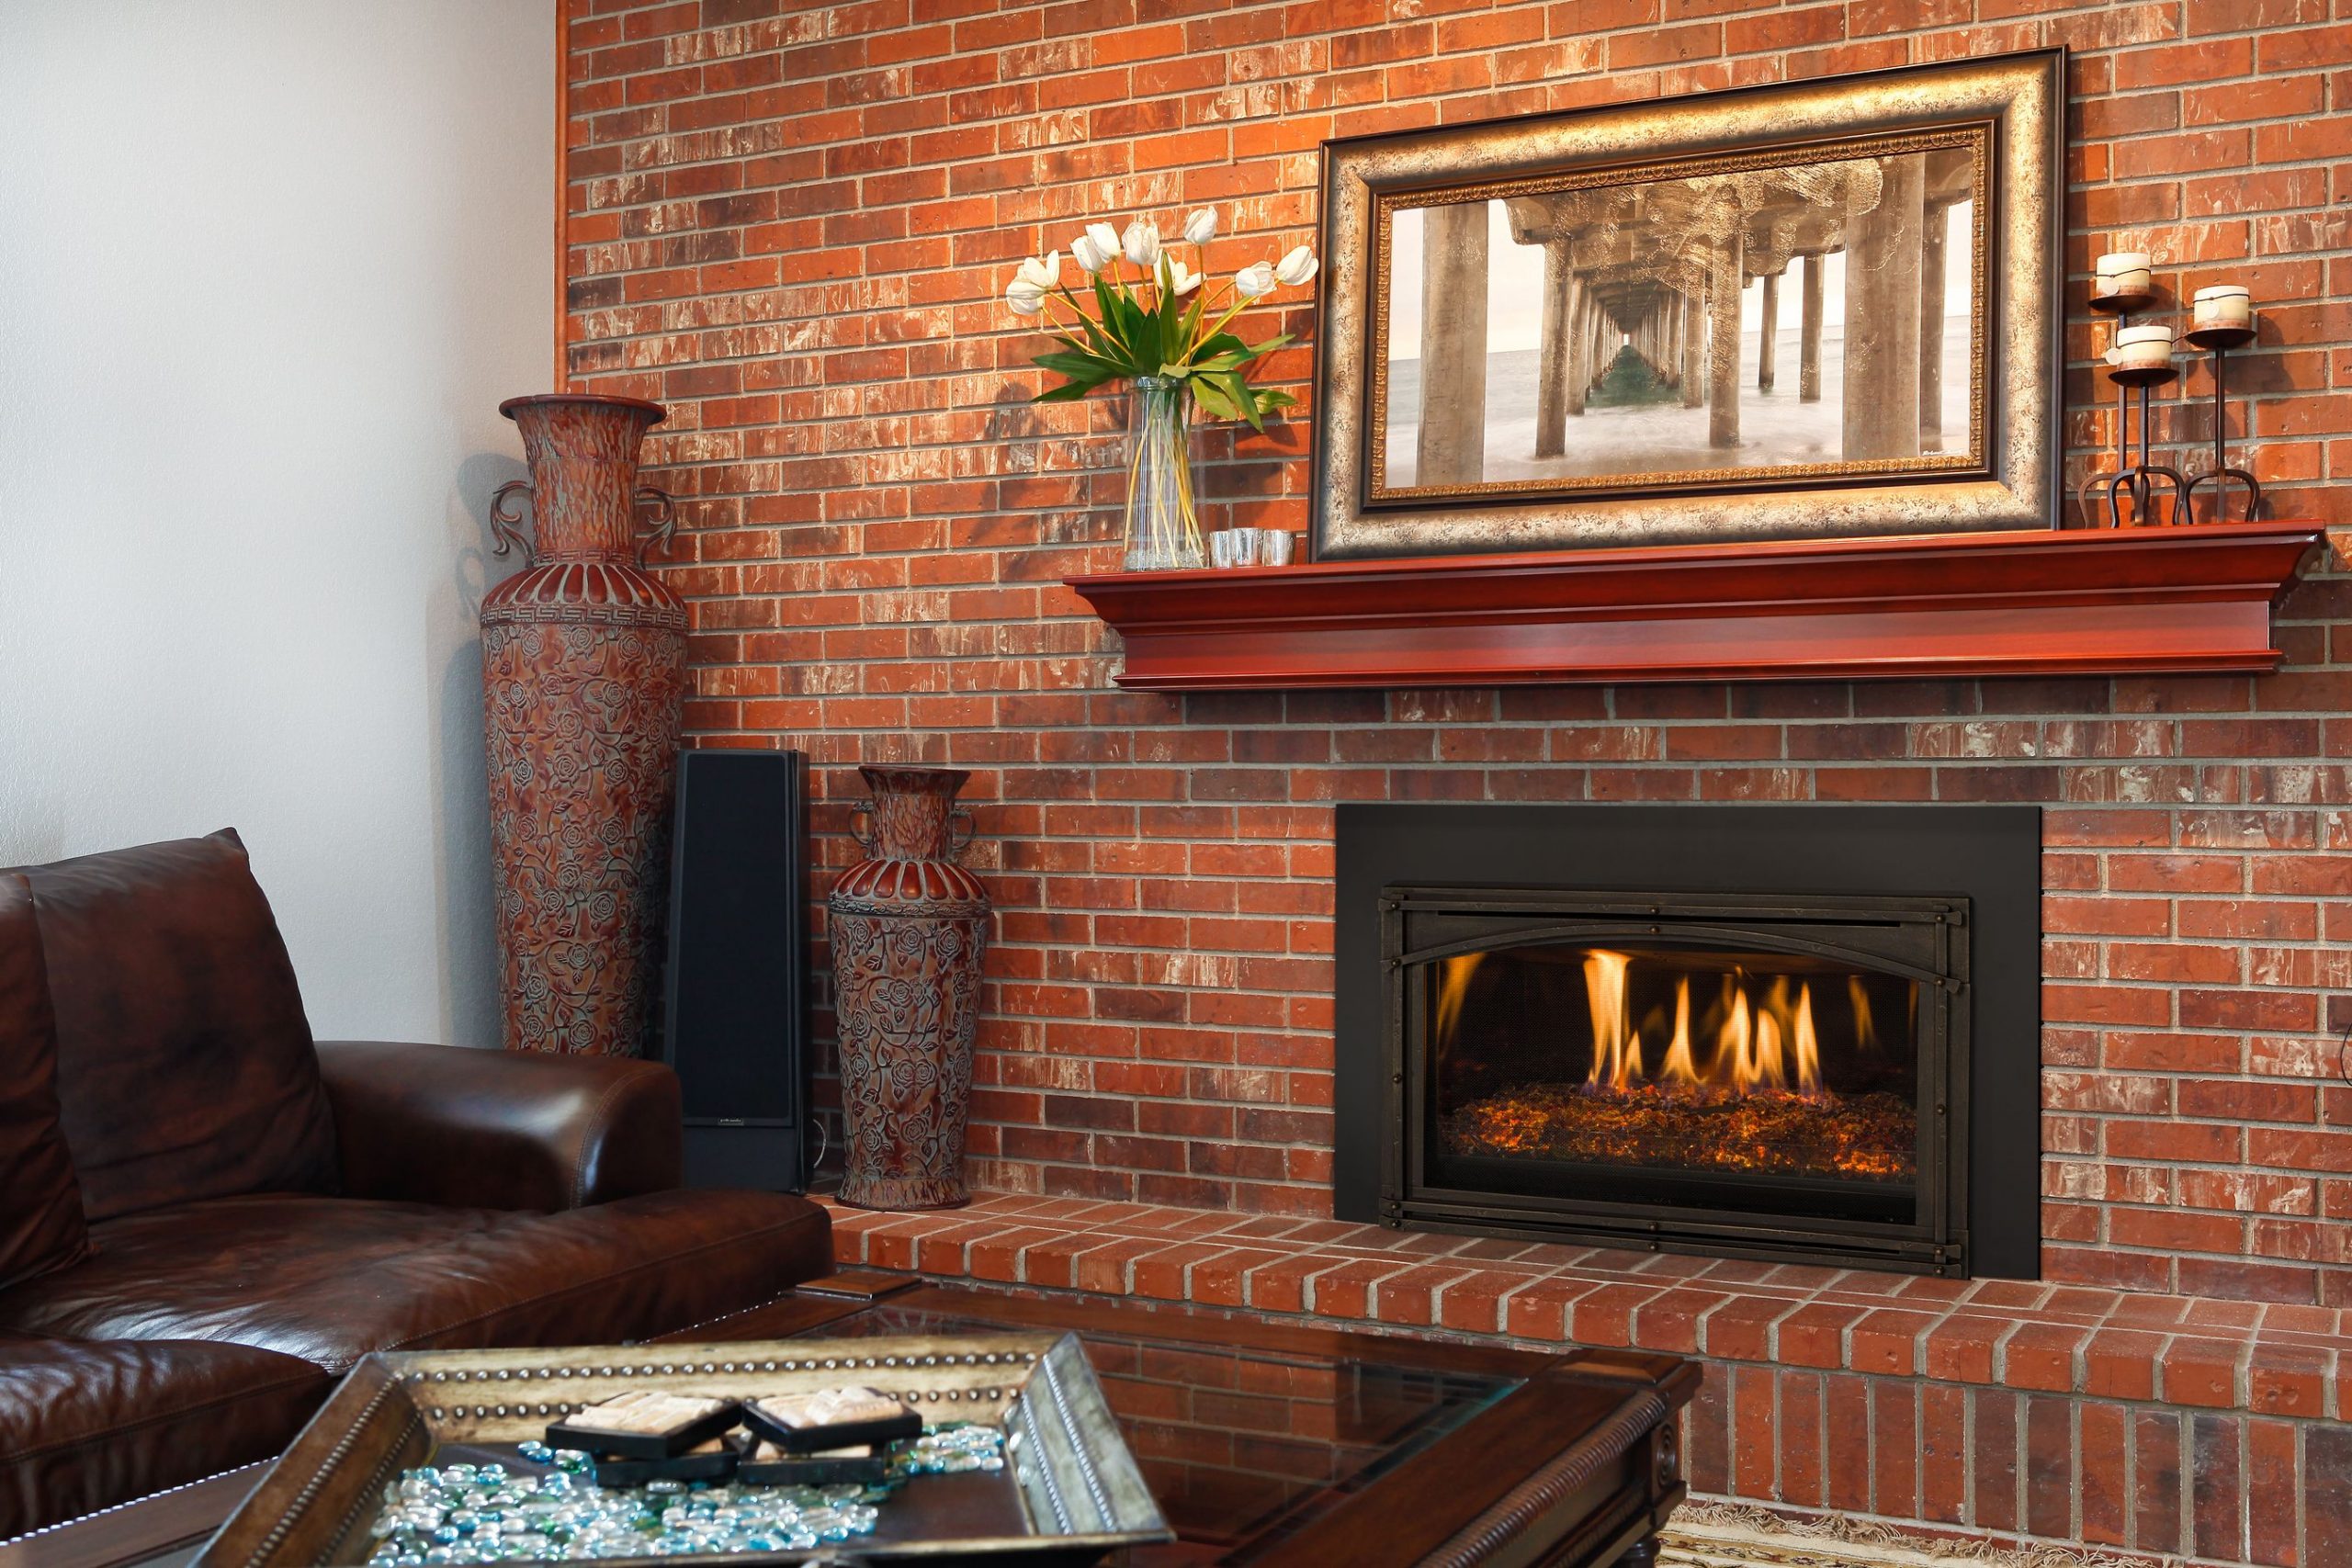 Replacing Your Old Fireplace with a New One